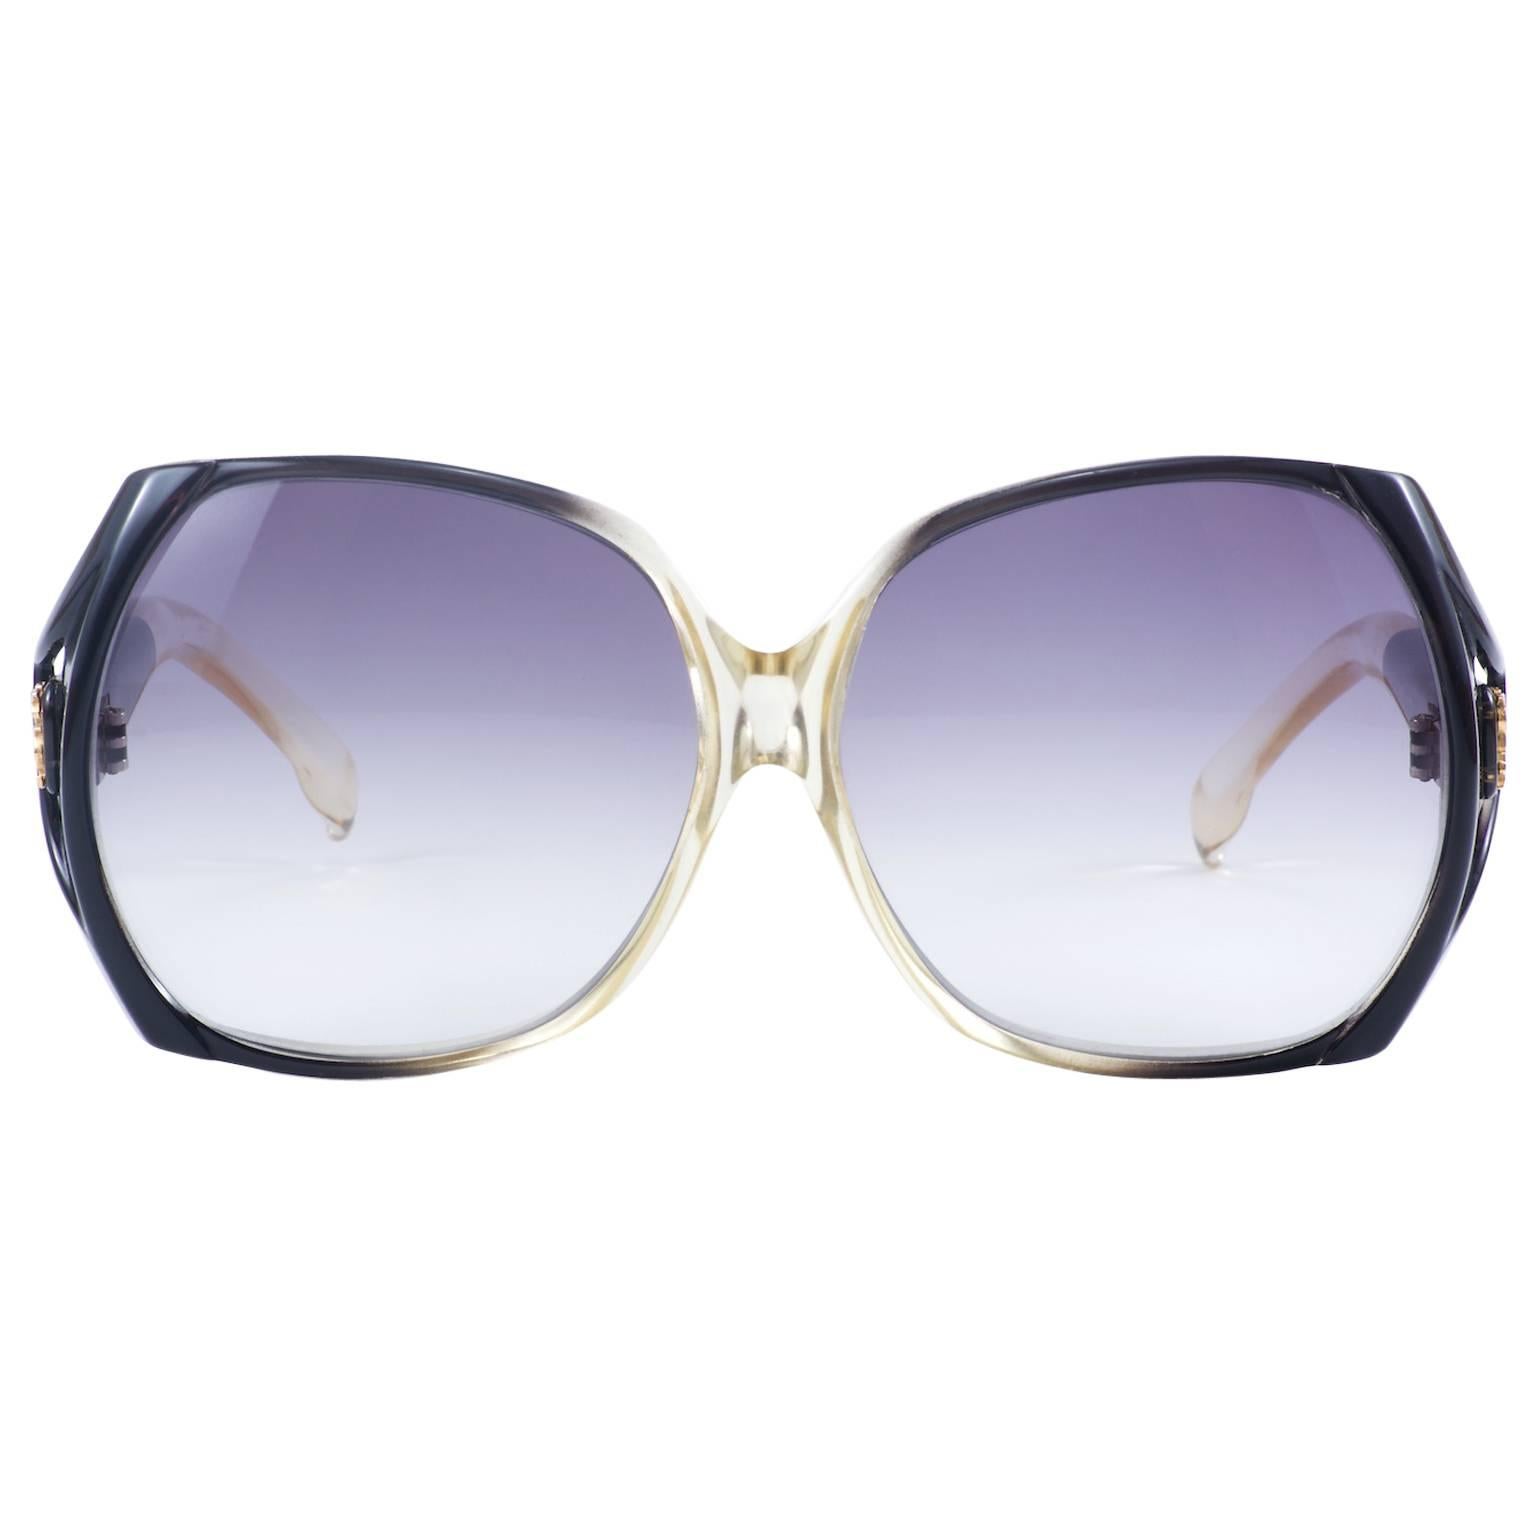 Vintage Haute Couture Runway Yves Saint Laurent Sunglasses, Made in France For Sale